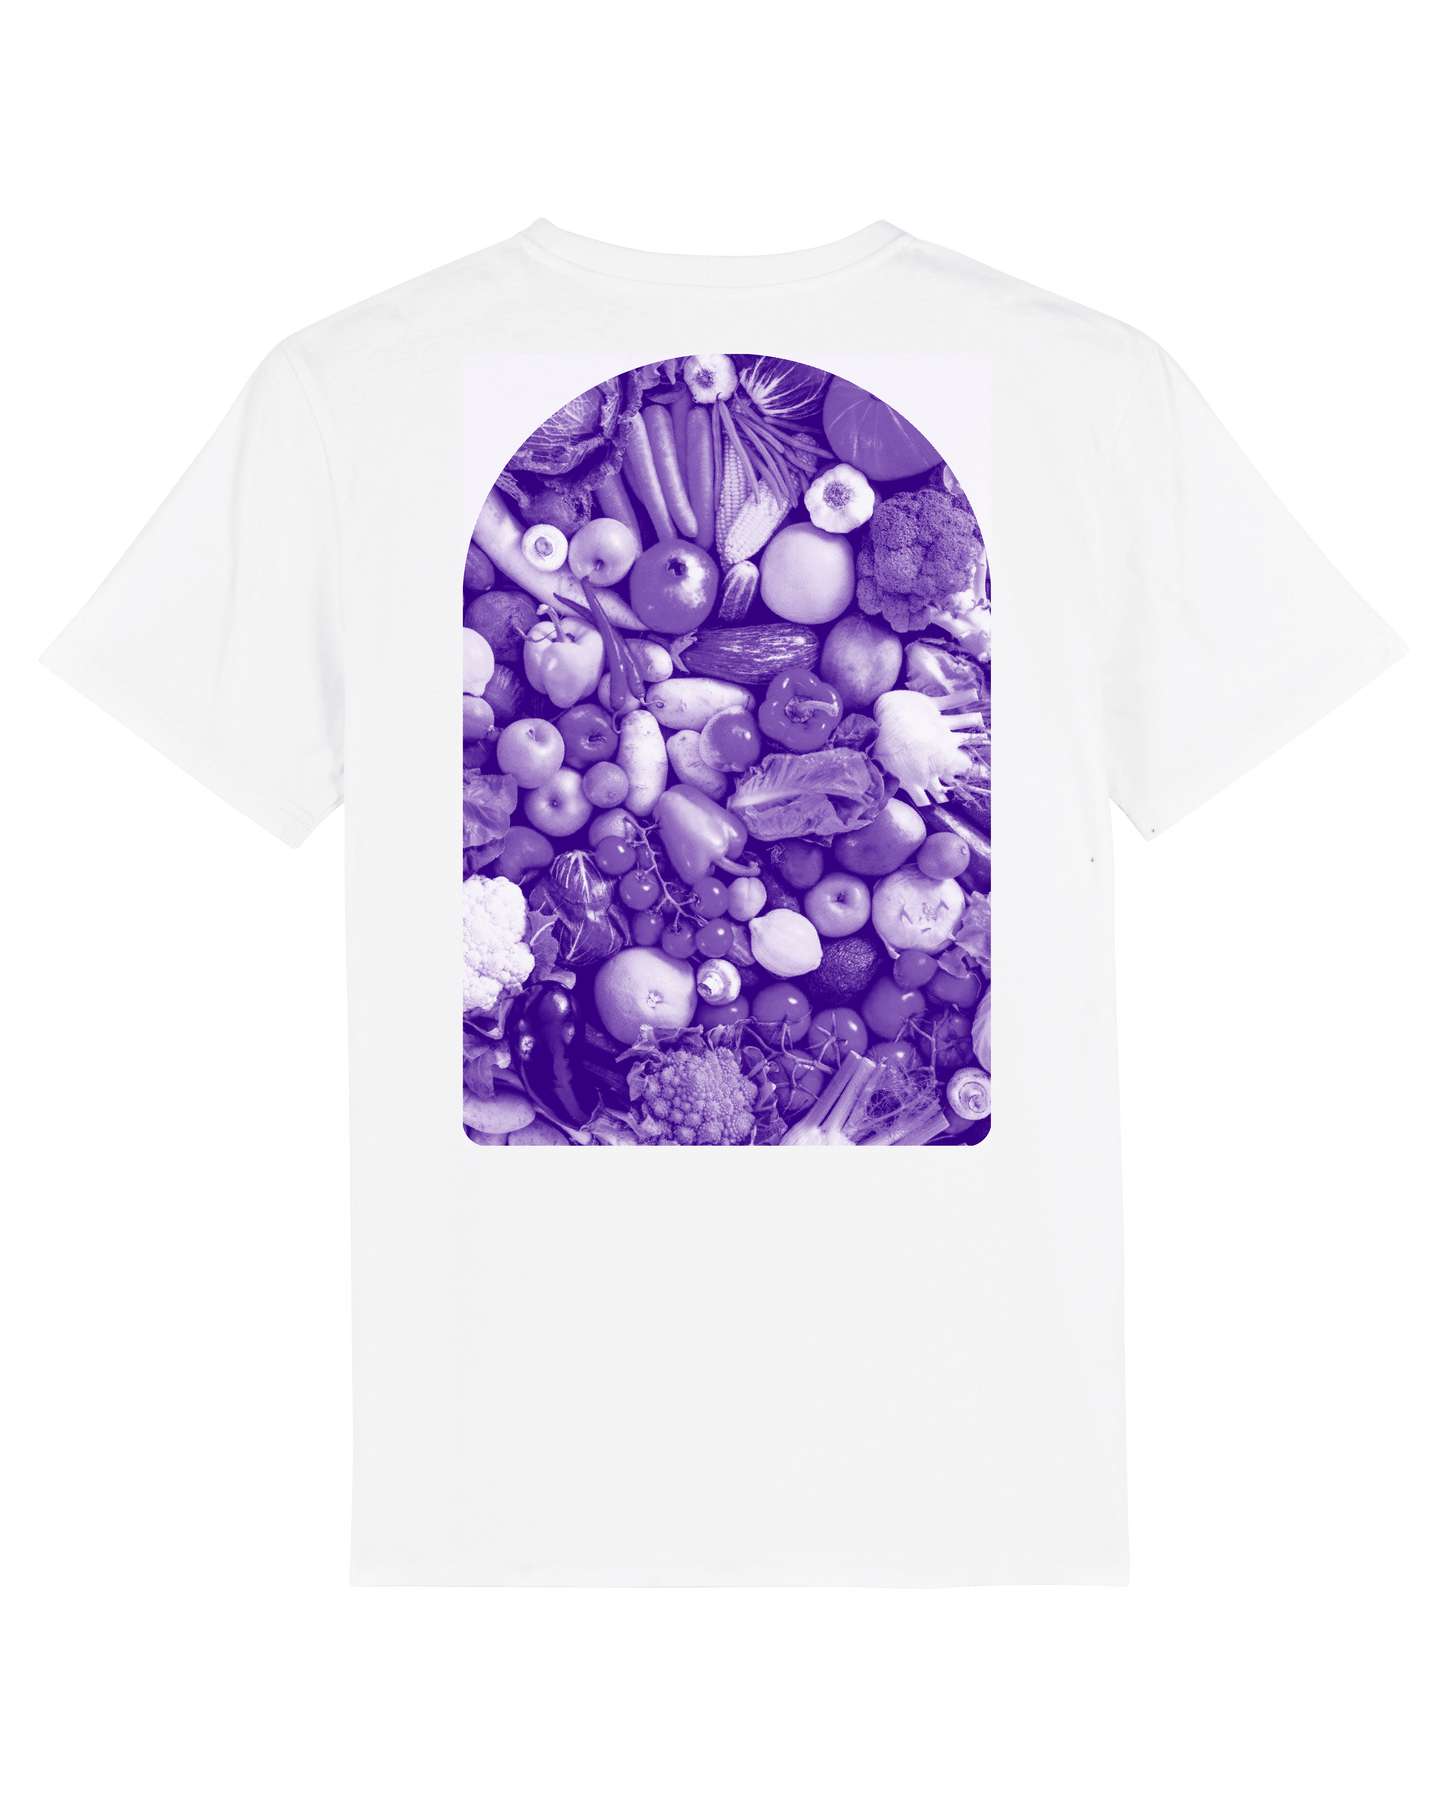 Eat Your Vegetables White TEE by Family Store